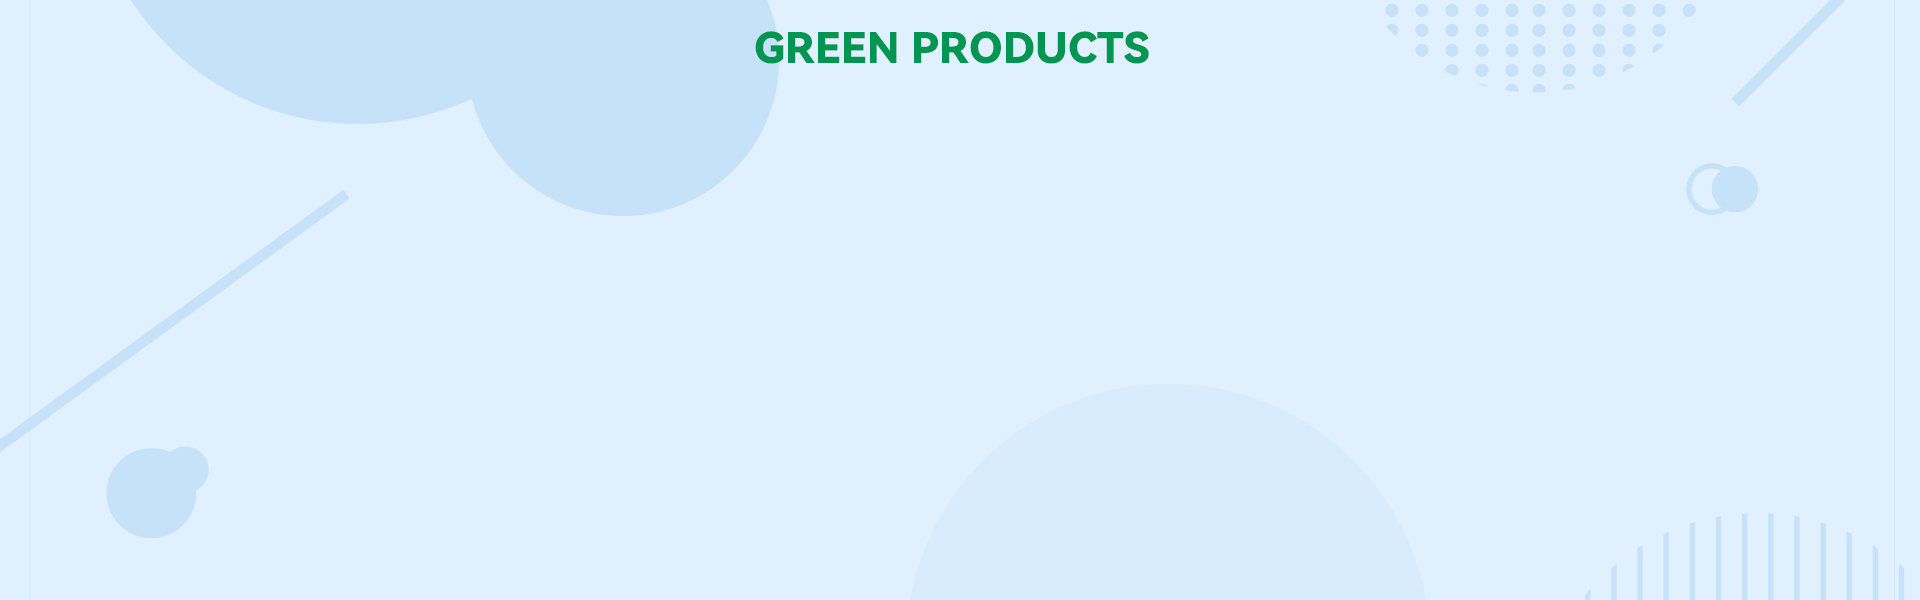 GREEN PRODUCTS